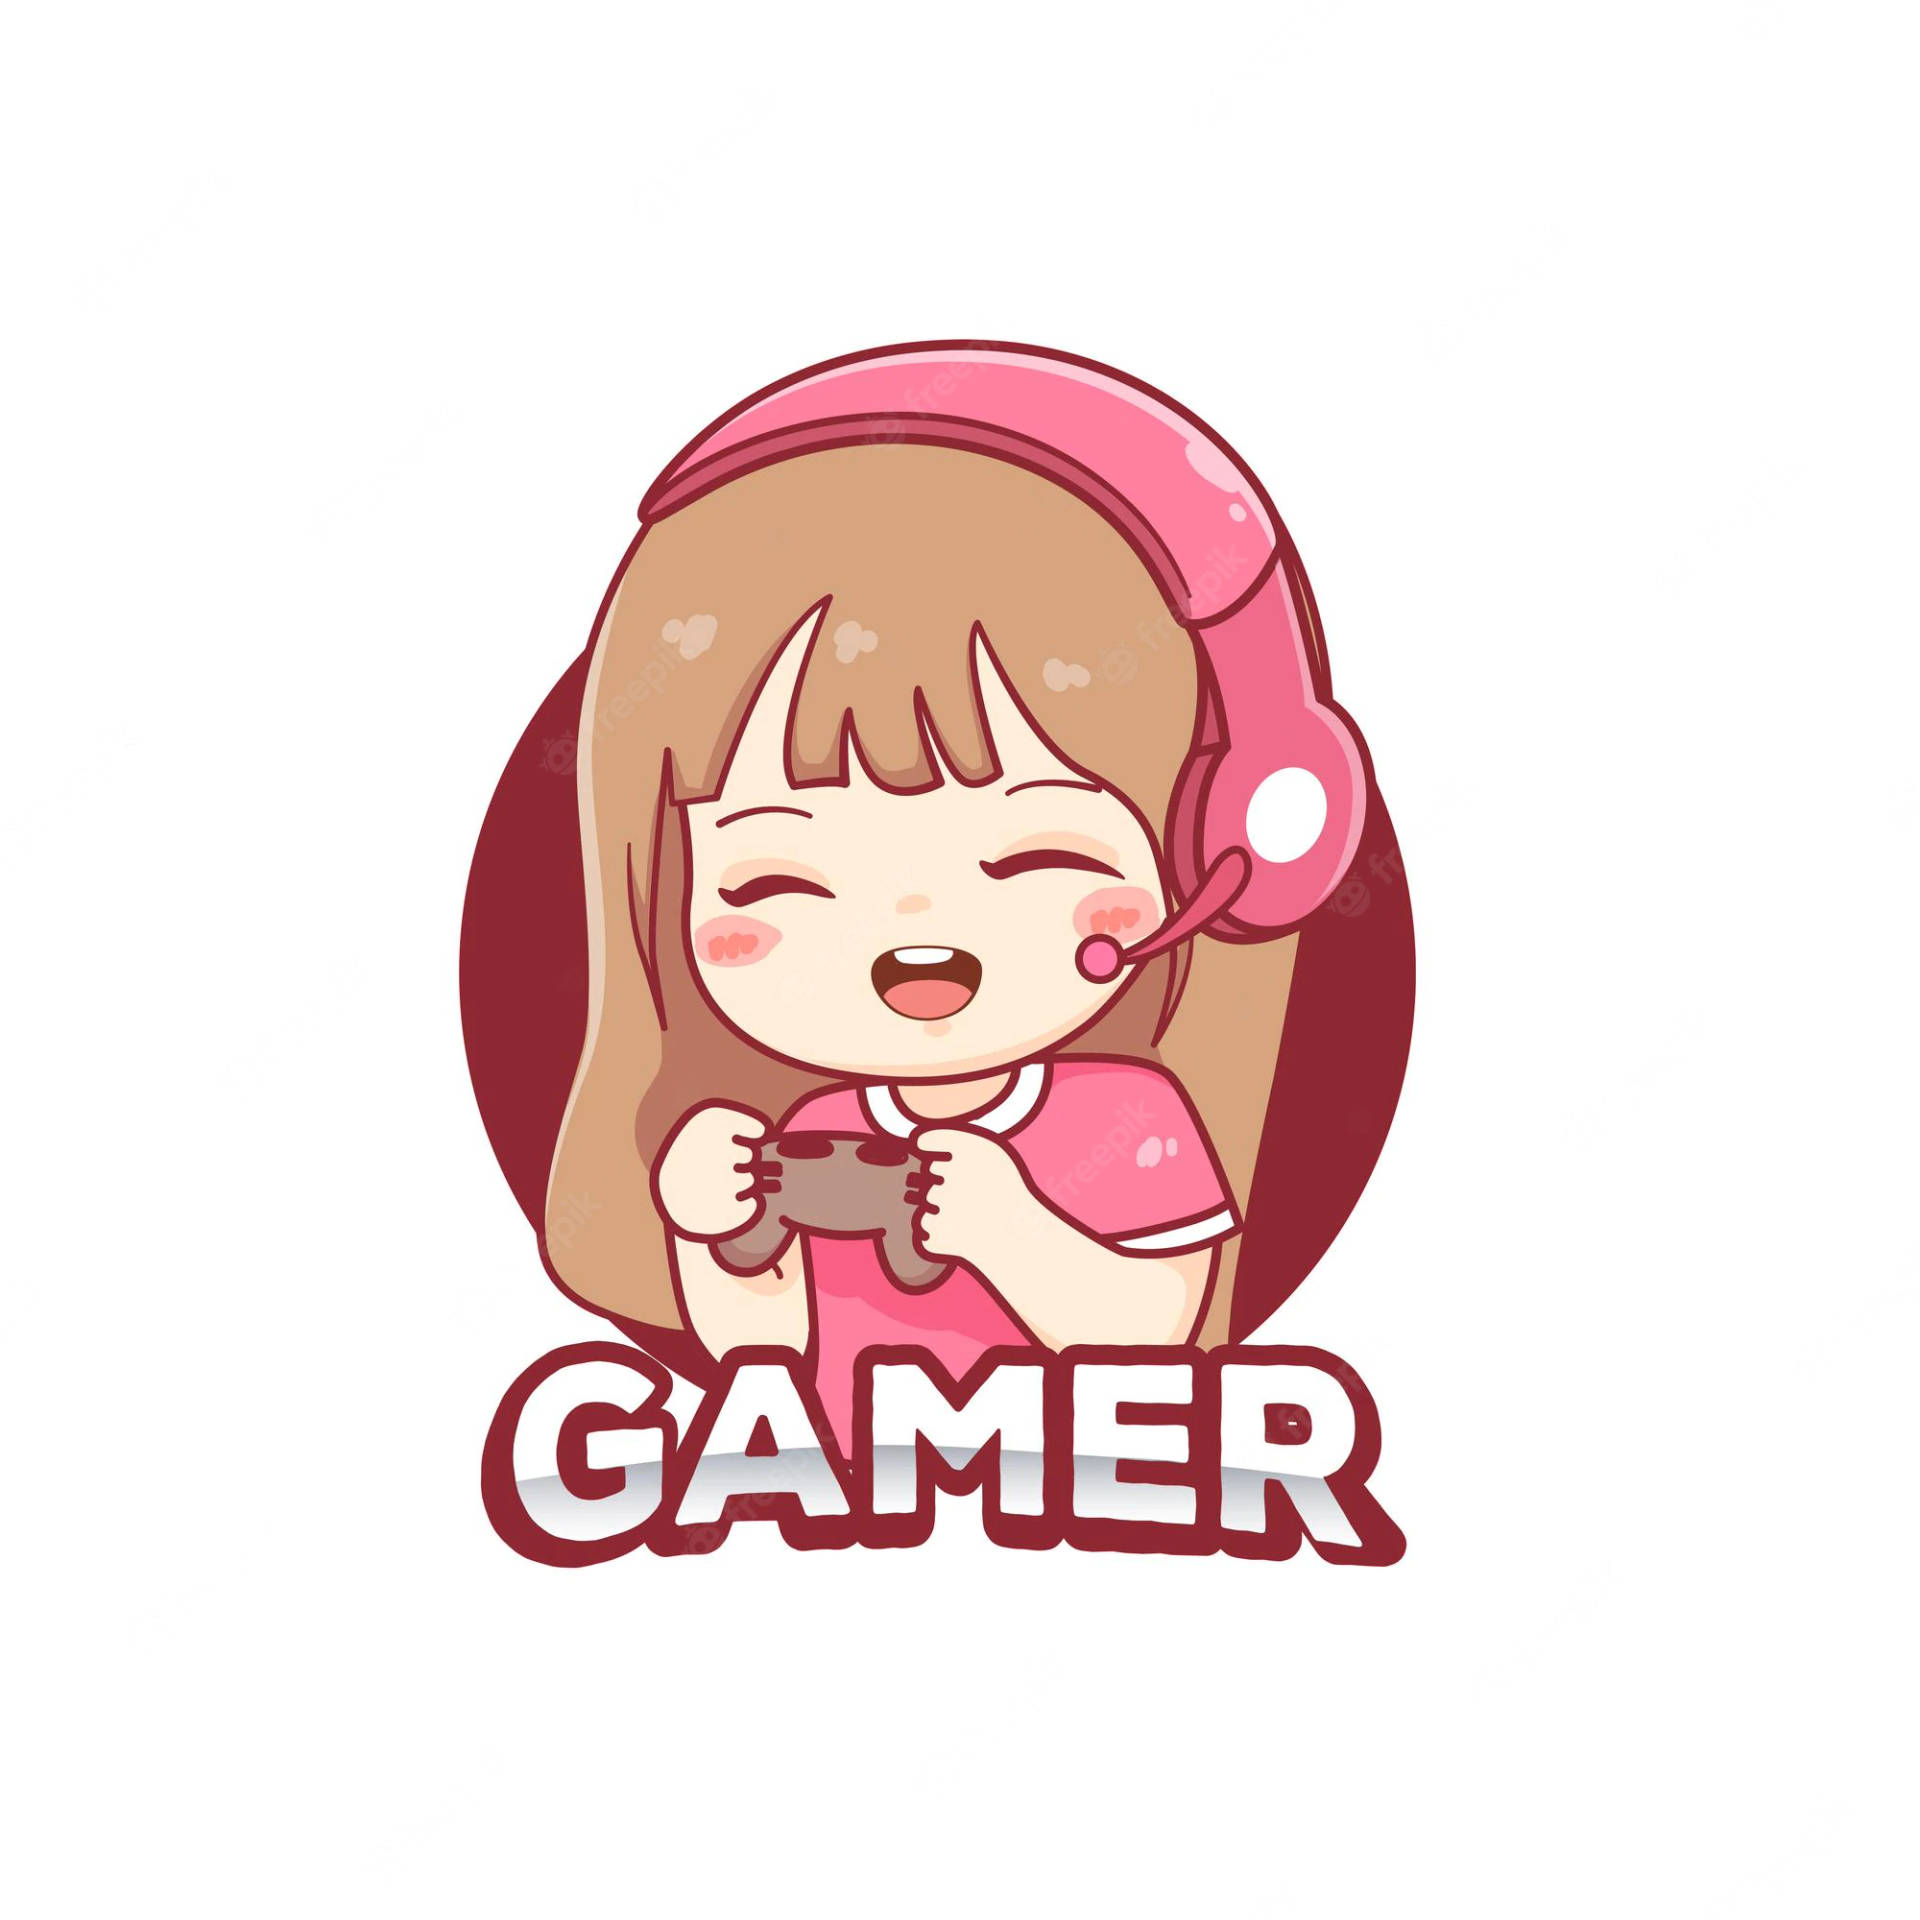 Cute Pink Girl Gamer Logo Picture